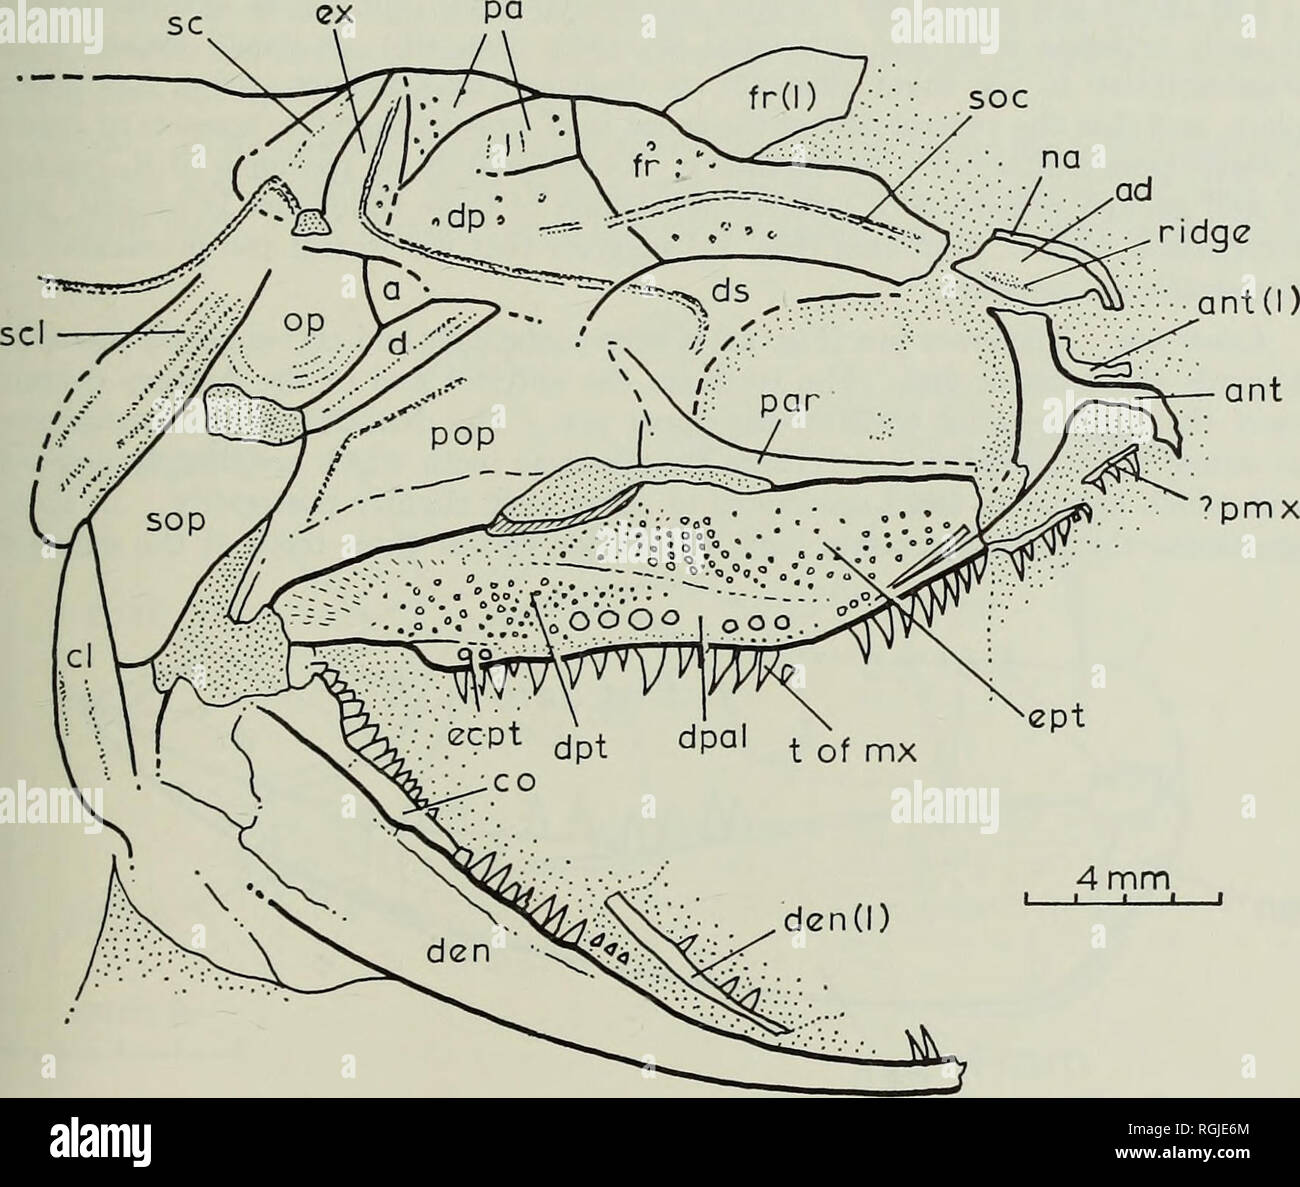 . Bulletin of the British Museum (Natural History), Geology. FISHES OF THE TRIASSIC 255 bears a similar series of concentric ridges. The anterior edge of the subopercular Ues at about 65 ° to the ventral margin of the maxilla. There is a single triangular branchiostegal element which is half as long as the supobercular. Together, the opercular bones form a shallow crescent. Anterior to the opercular there is an antopercular and a dermohyal. The dermo- hyal is wedge-shaped and extends along the whole anterior edge of the opercular. It bears elongate rugae which run parallel to its long axis (P. Stock Photo